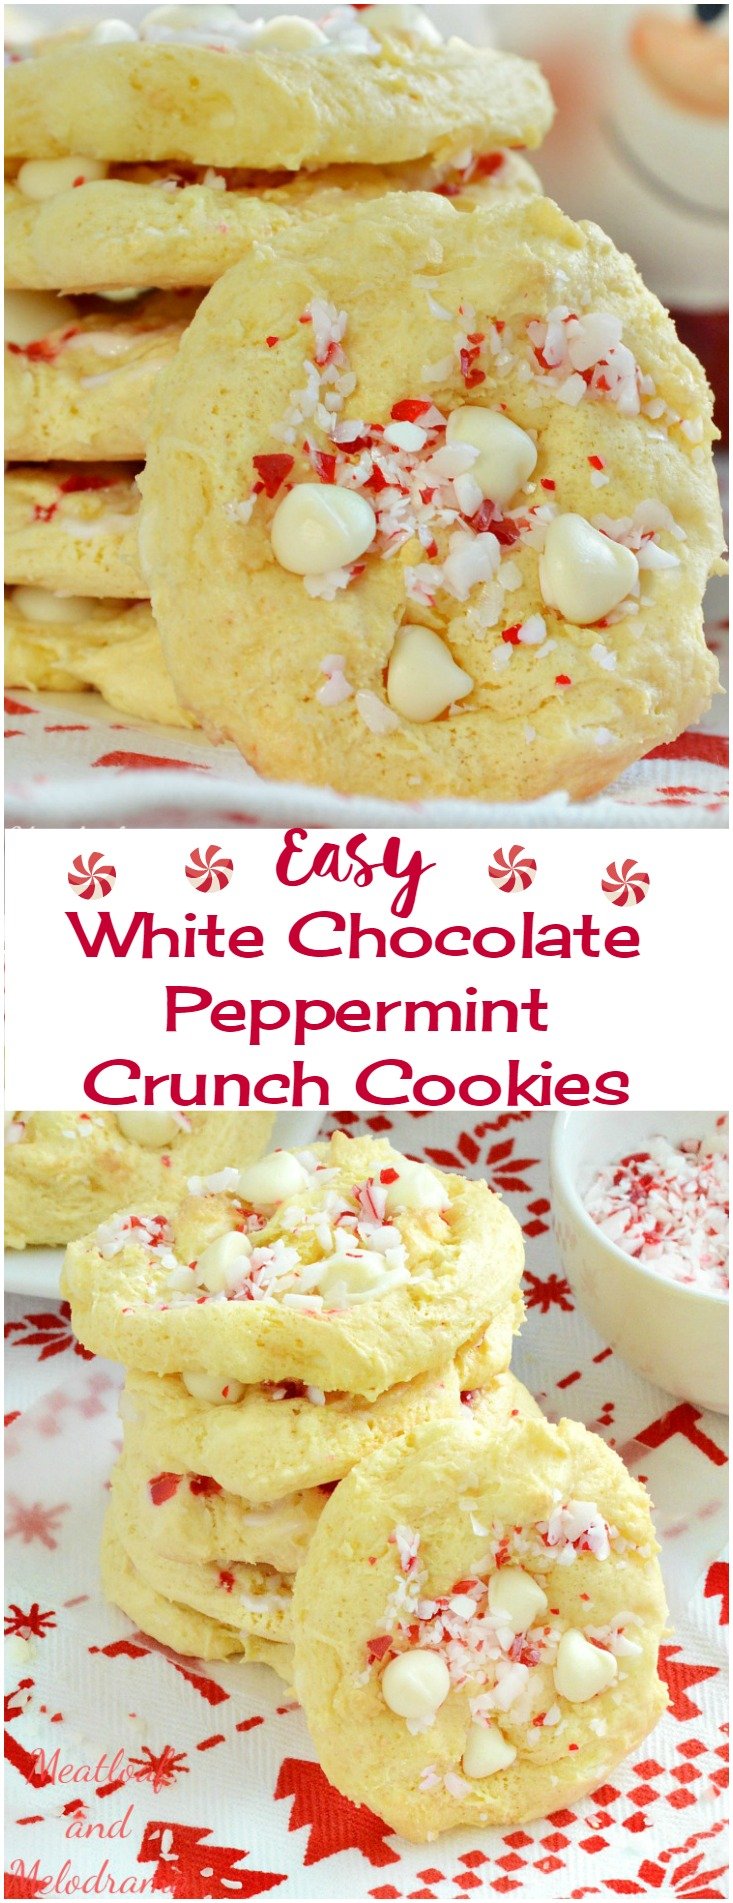 Easy White Chocolate Peppermint Crunch Cookies